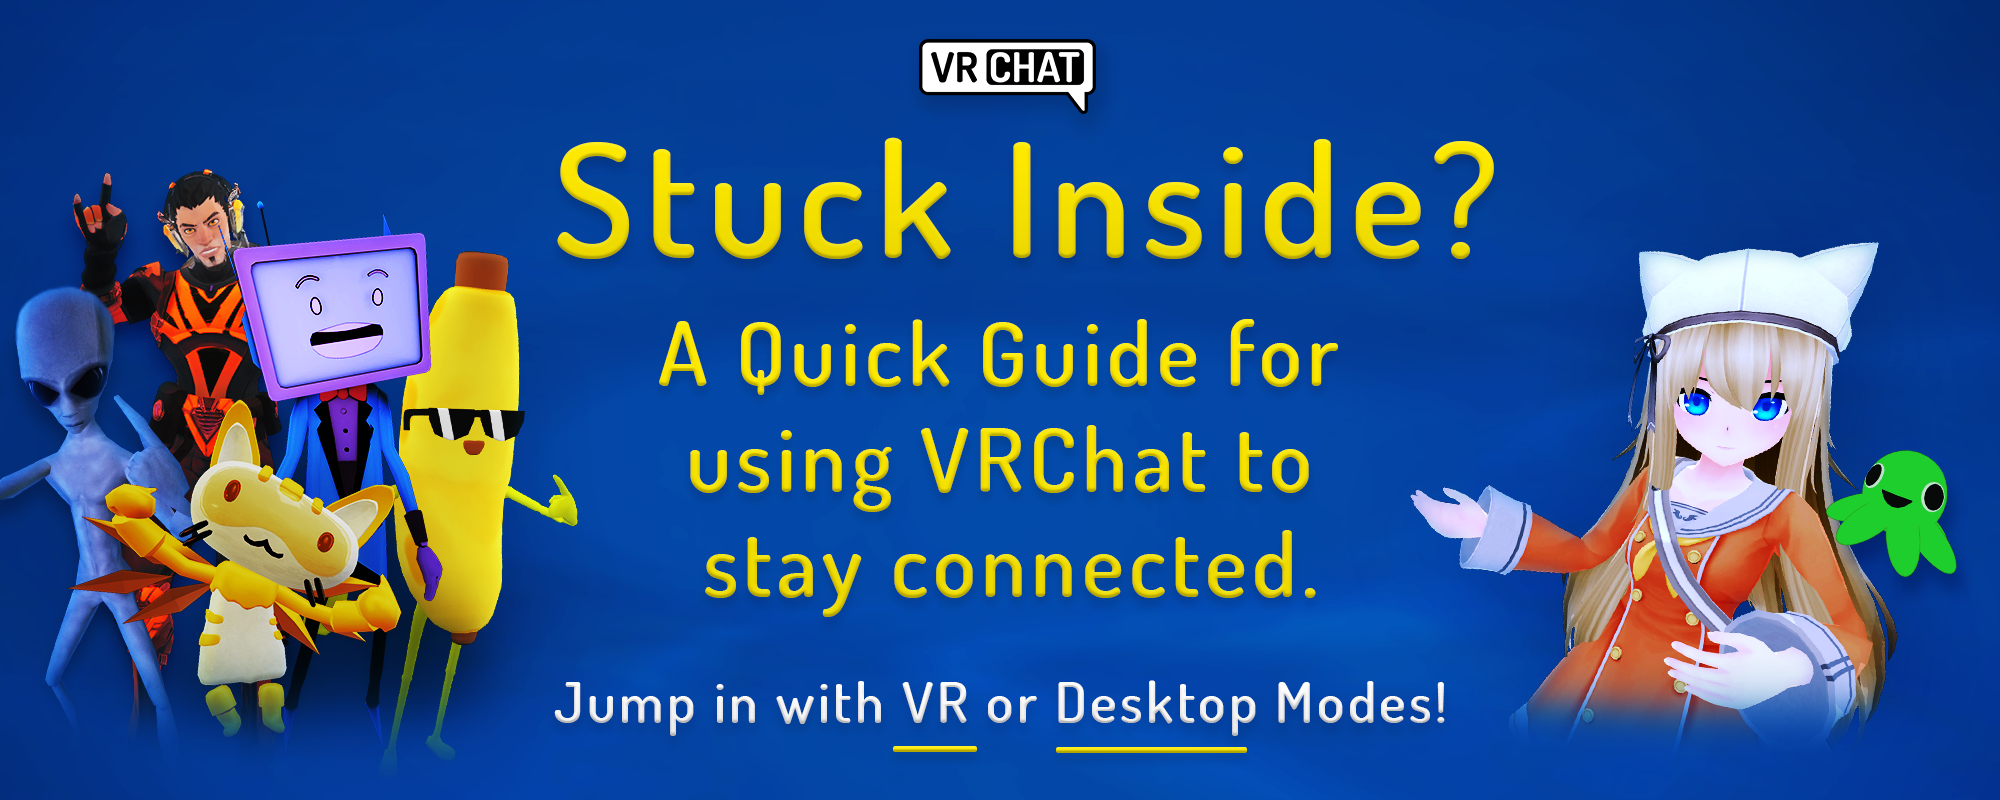 Stuck Inside? A Quick Guide for using VRChat to Stay Connected | by Tupper  | VRChat | Medium